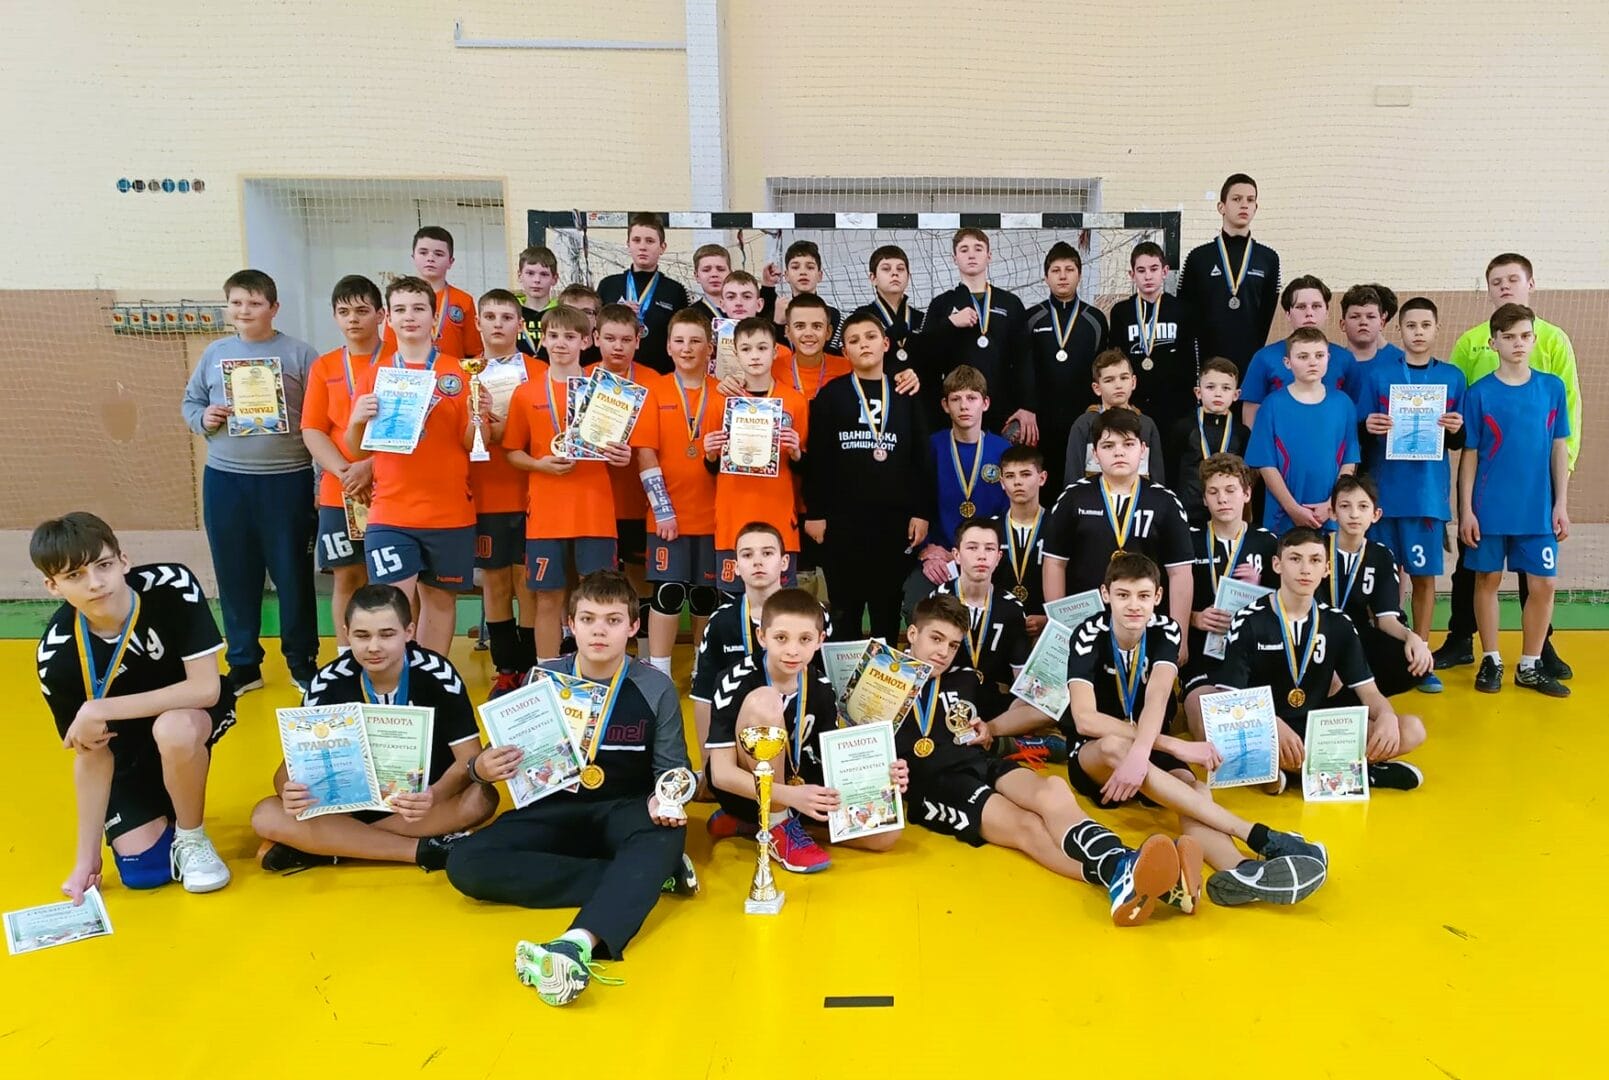 Handball competition among young boys in the Community 